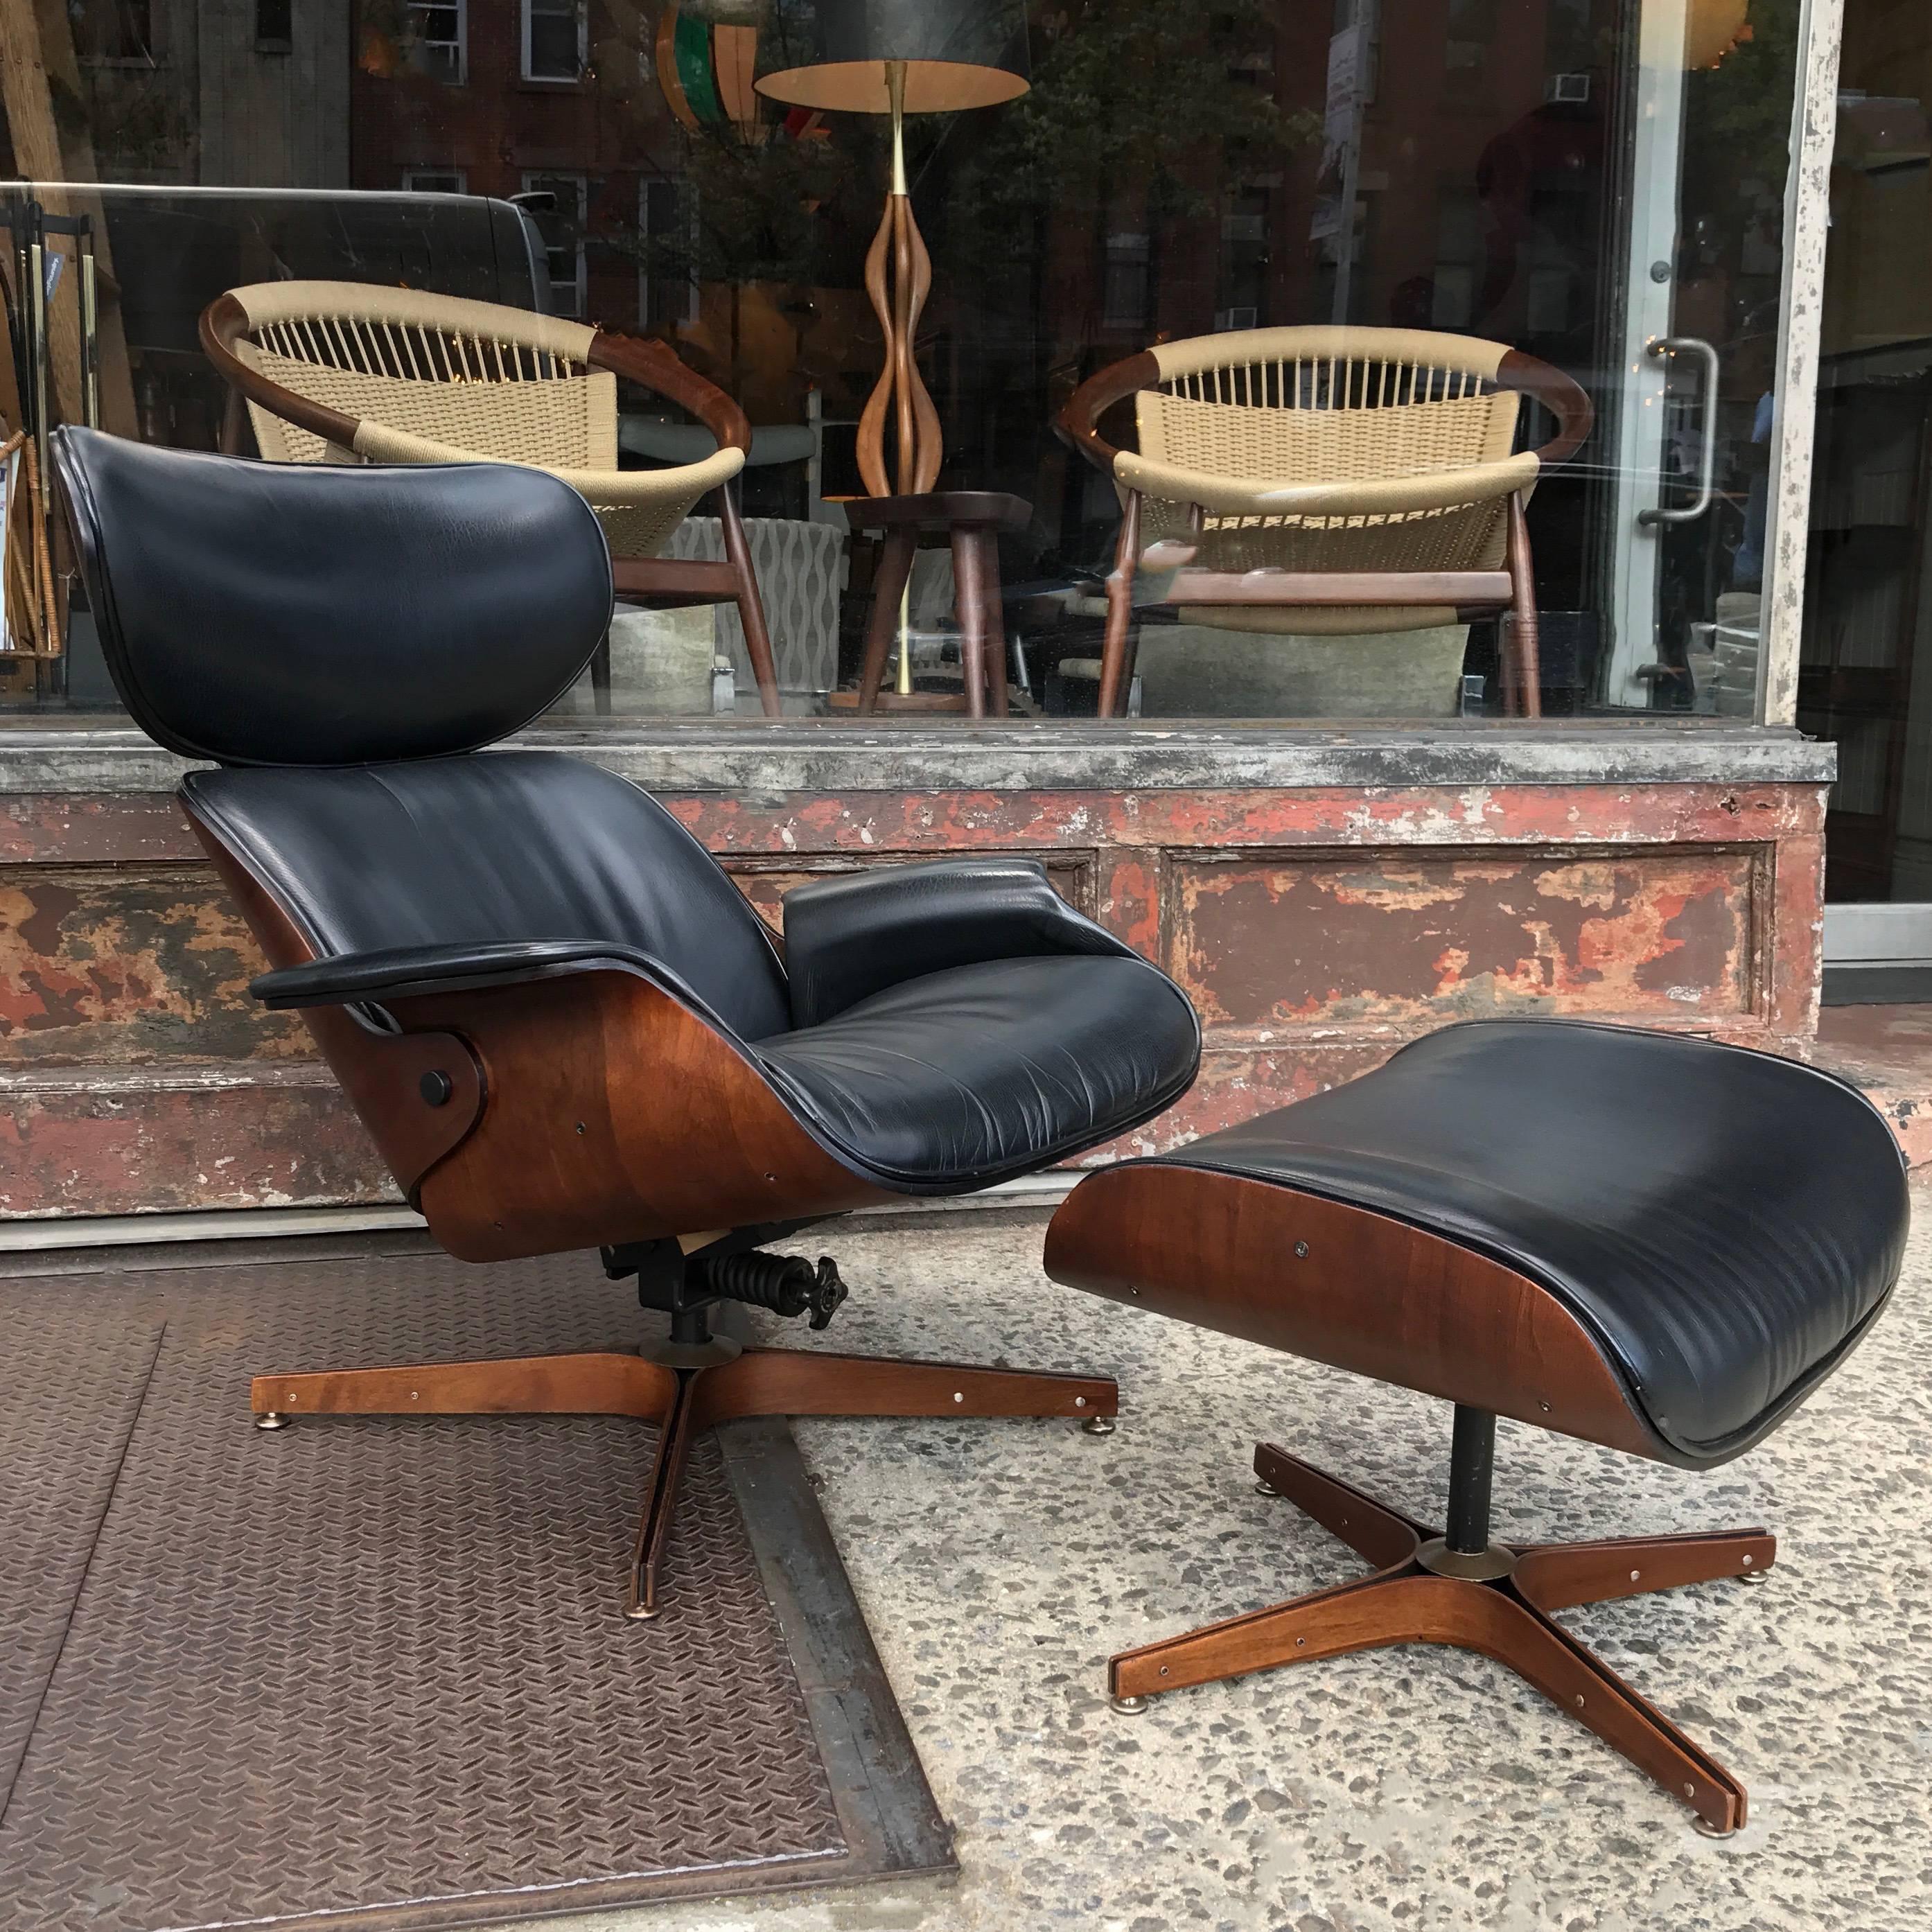 Classic, Mid-Century Modern, swivel, reclining lounge chair with matching ottoman by George Mulhauser for Plycraft Associates. “Mr. Chair” features a molded, English walnut shell with black leather upholstery.

Ottoman: 24in W x 20in D x 16in H.